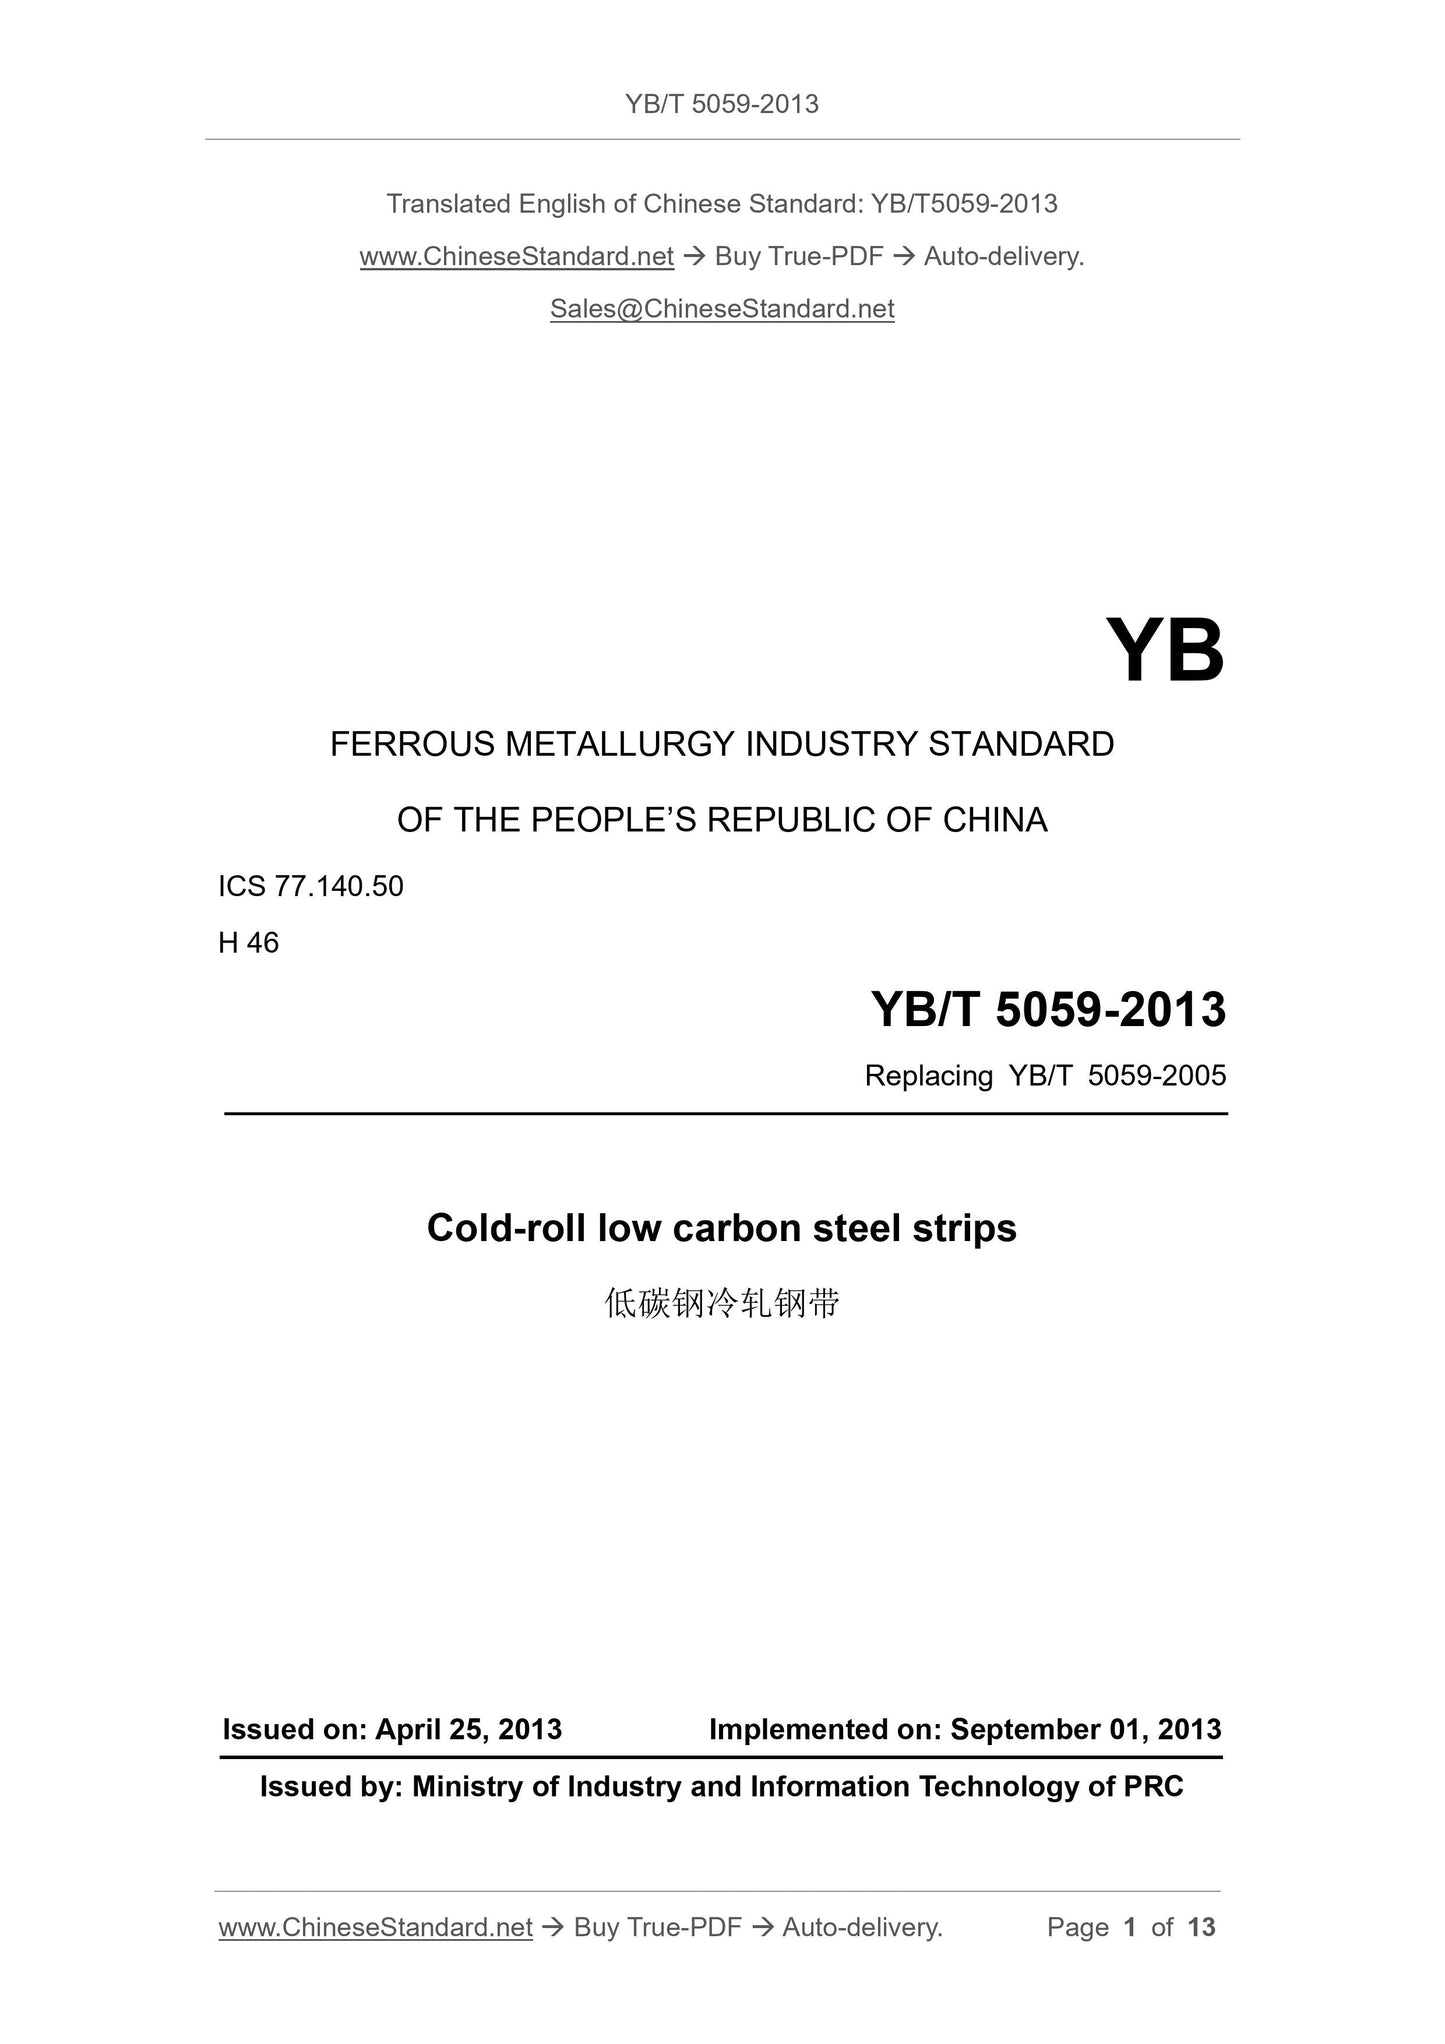 YB/T 5059-2013 Page 1